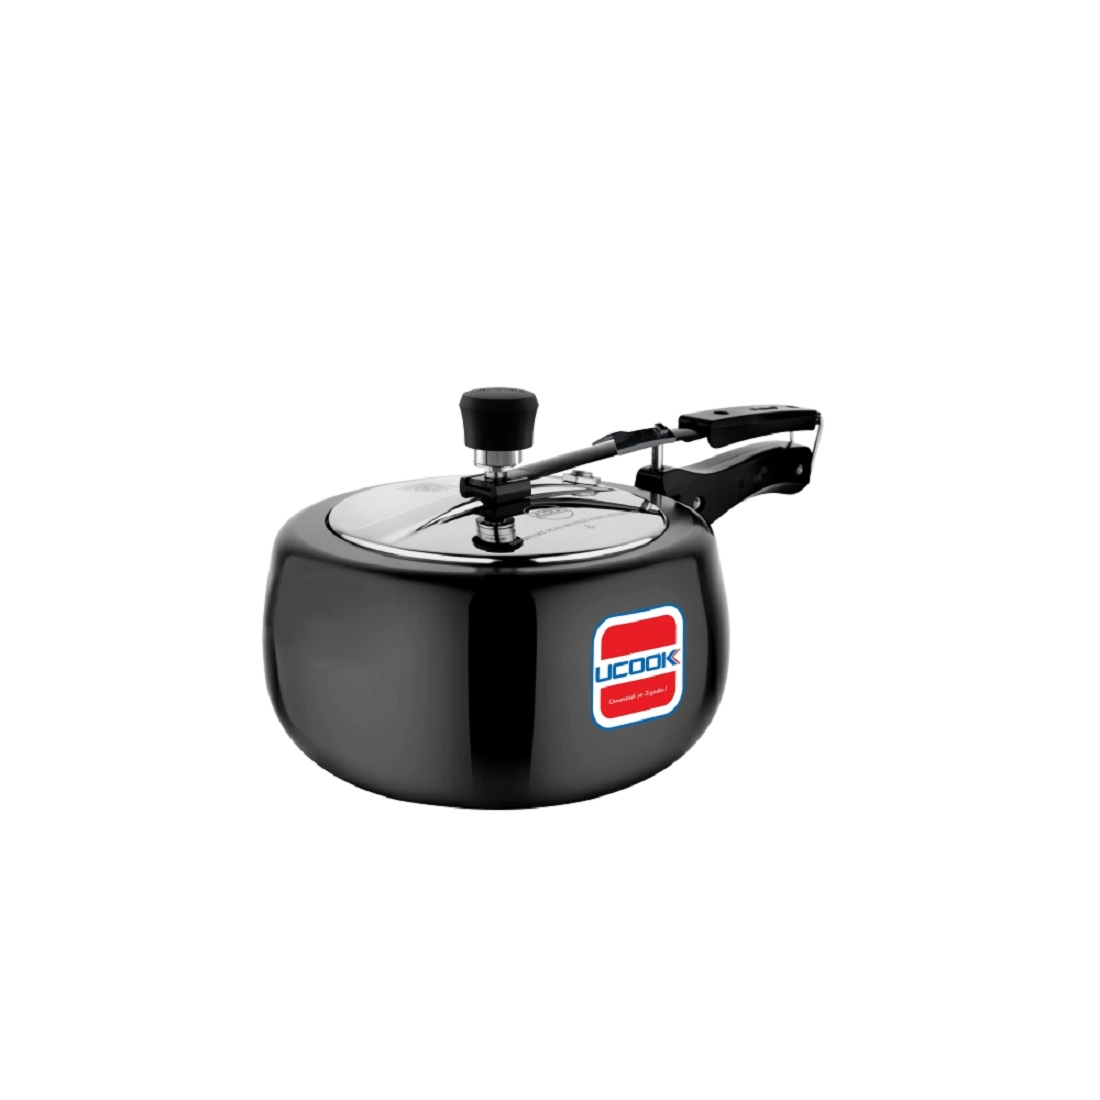 Pressure Cooker - UCOOK Platinum Duo HA INNER LID WITH SS LID 1.5 Ltr